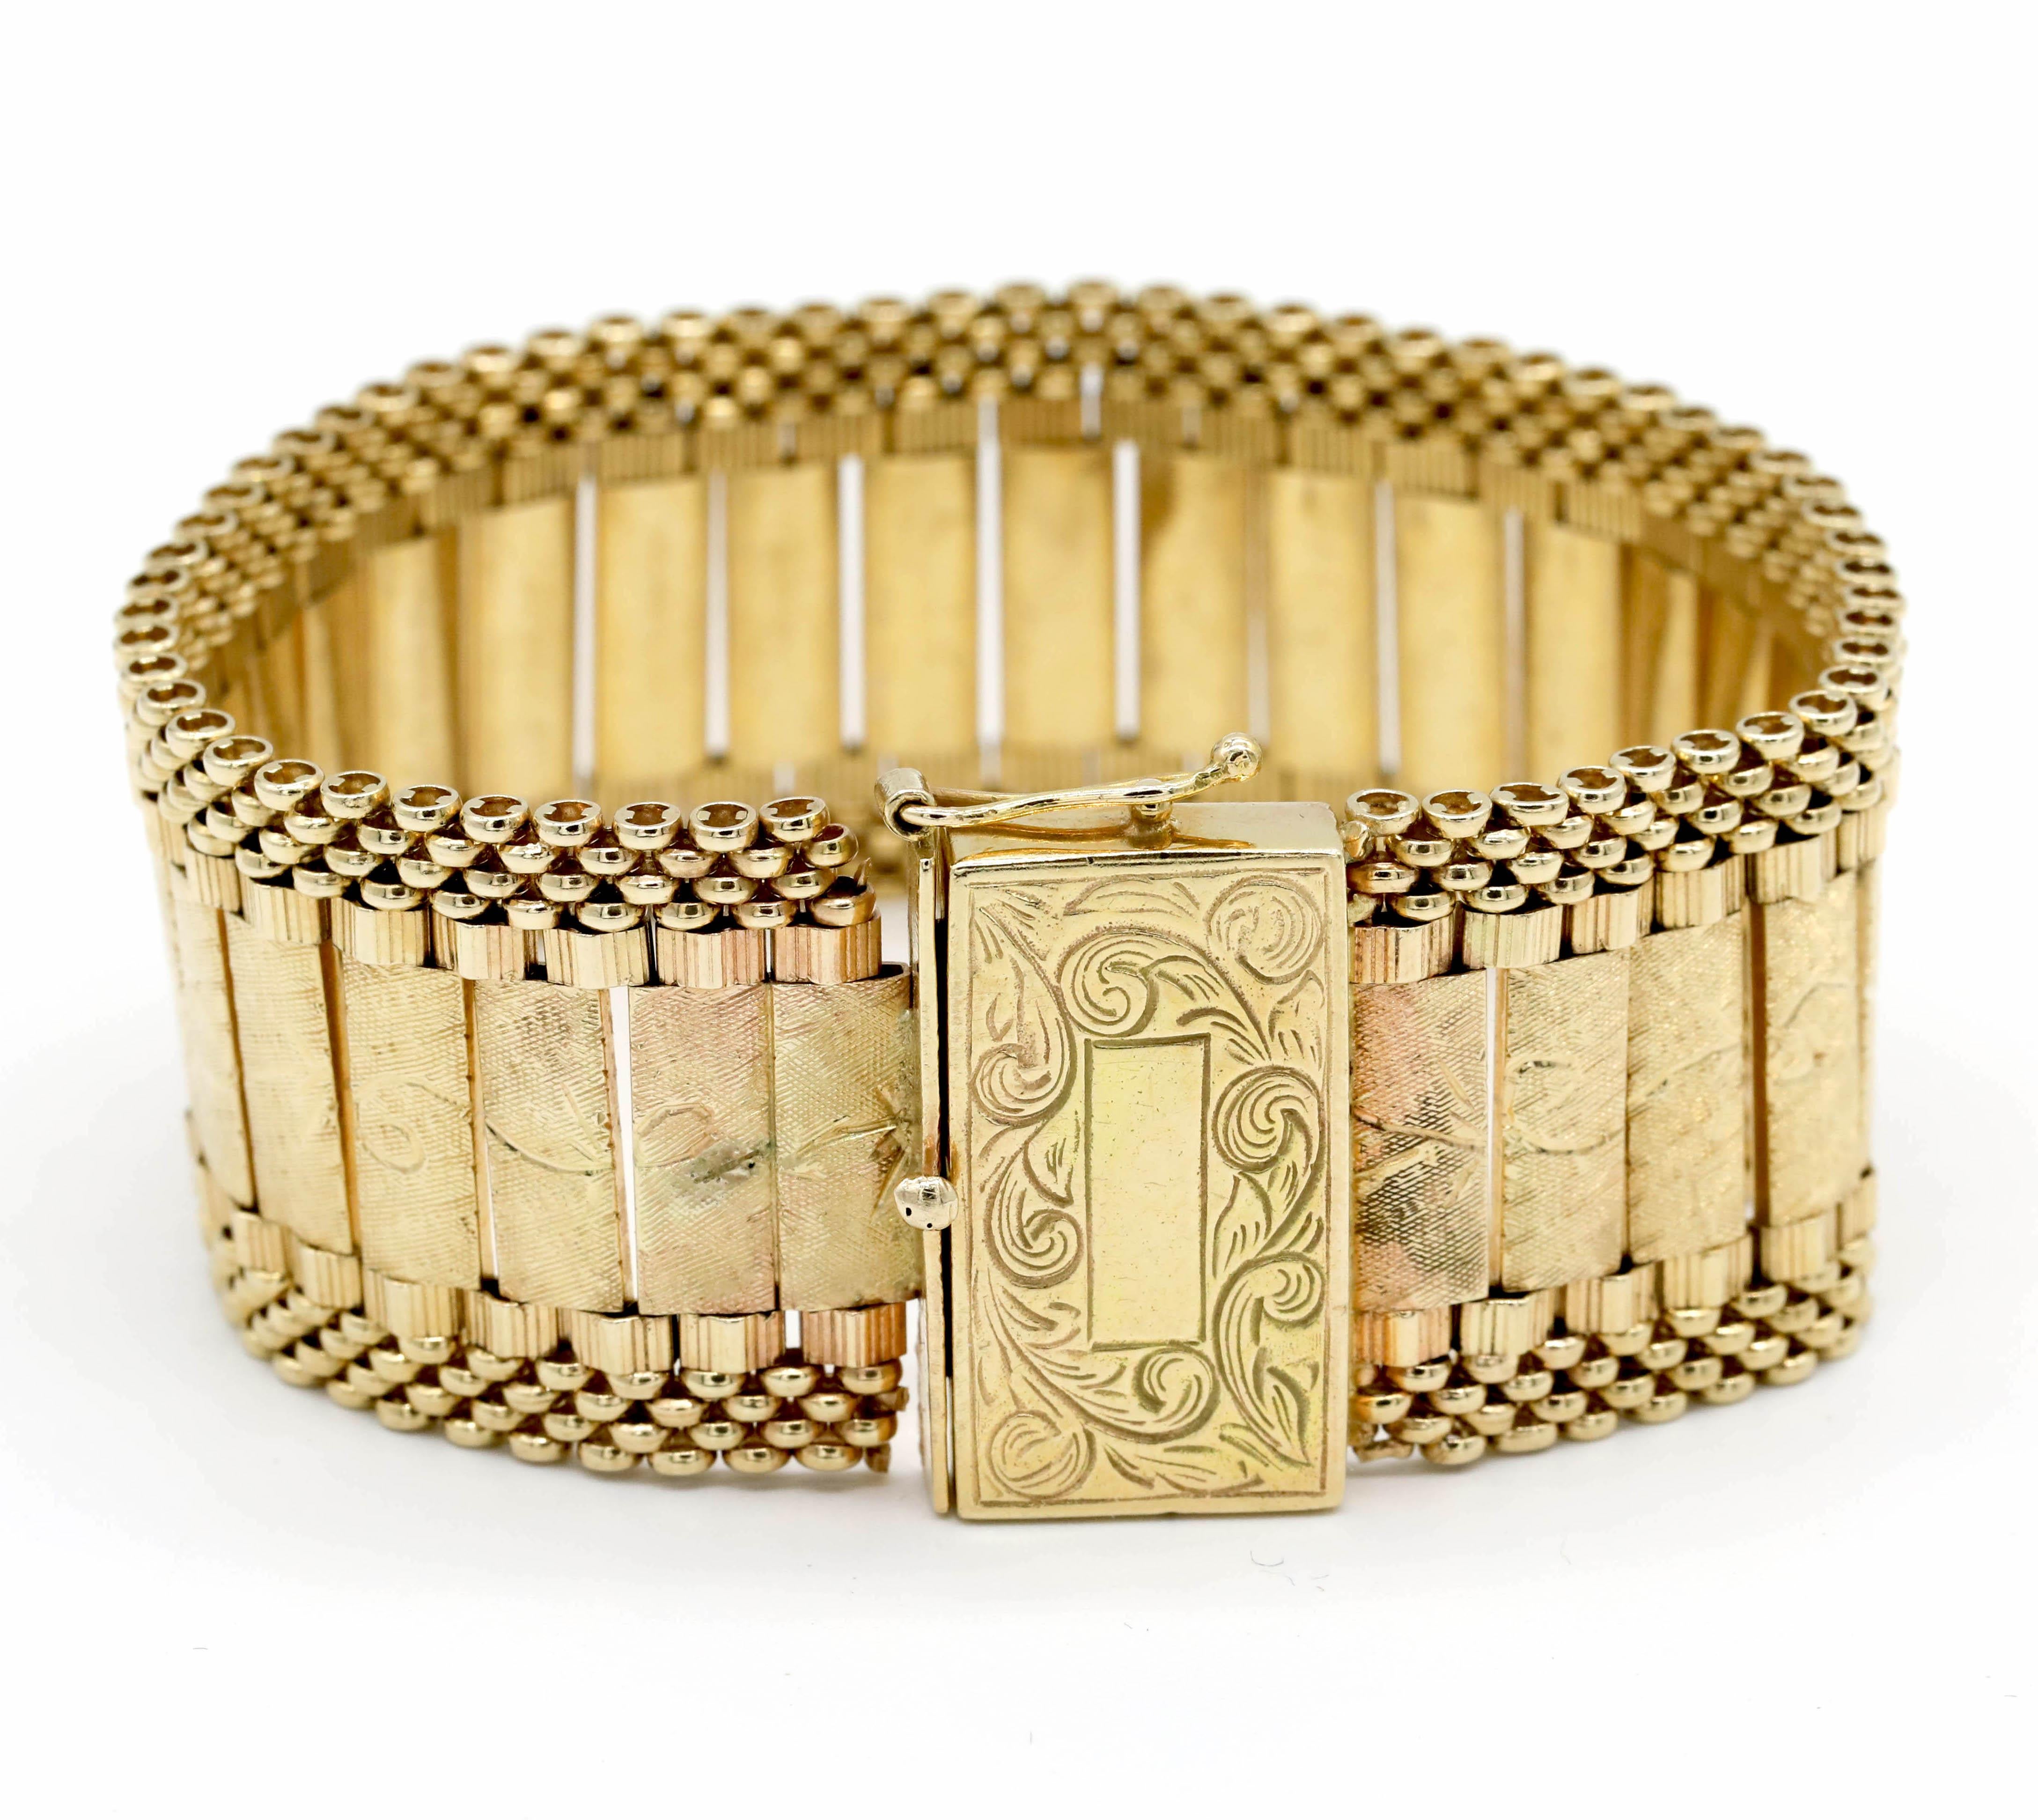 New Victorian Style Design  14 Karat Yellow Gold Cuff Bracelet 51 Grams

The Bracelet has a size NA.

We guarantee all products sold and our number one priority is your complete 100% satisfaction.

Returns are accepted and Fast delivery.

Please